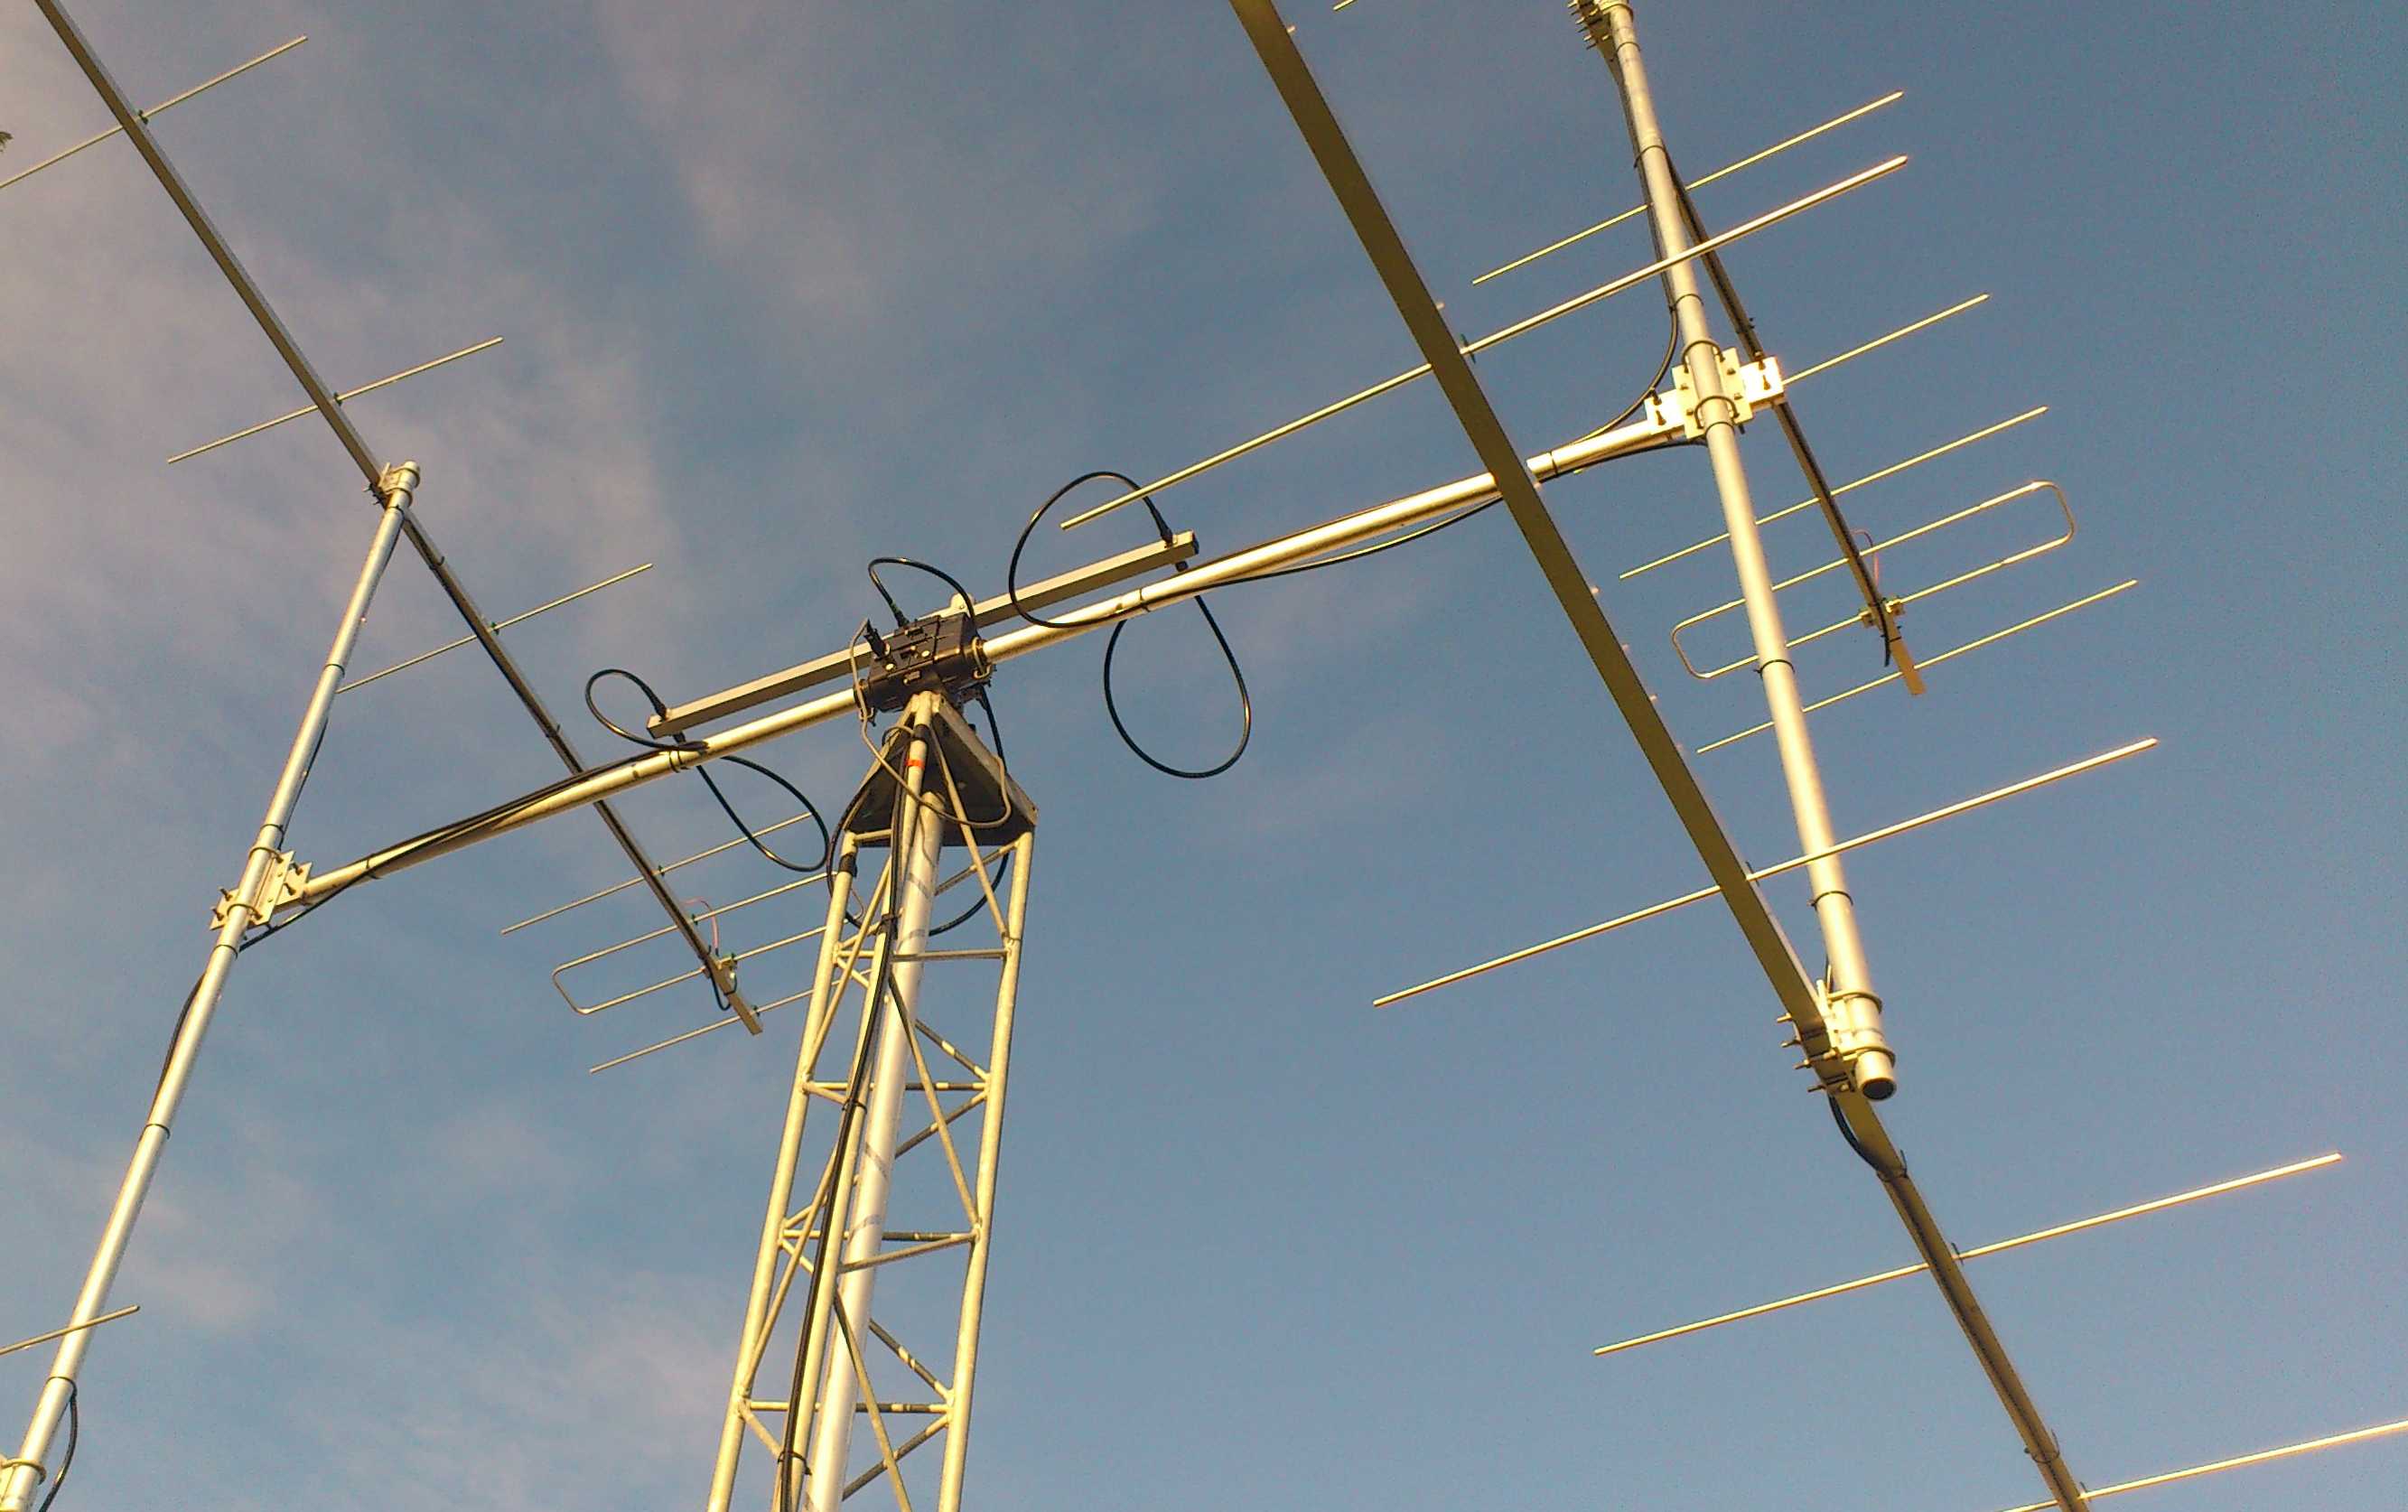 144MHz EME projects